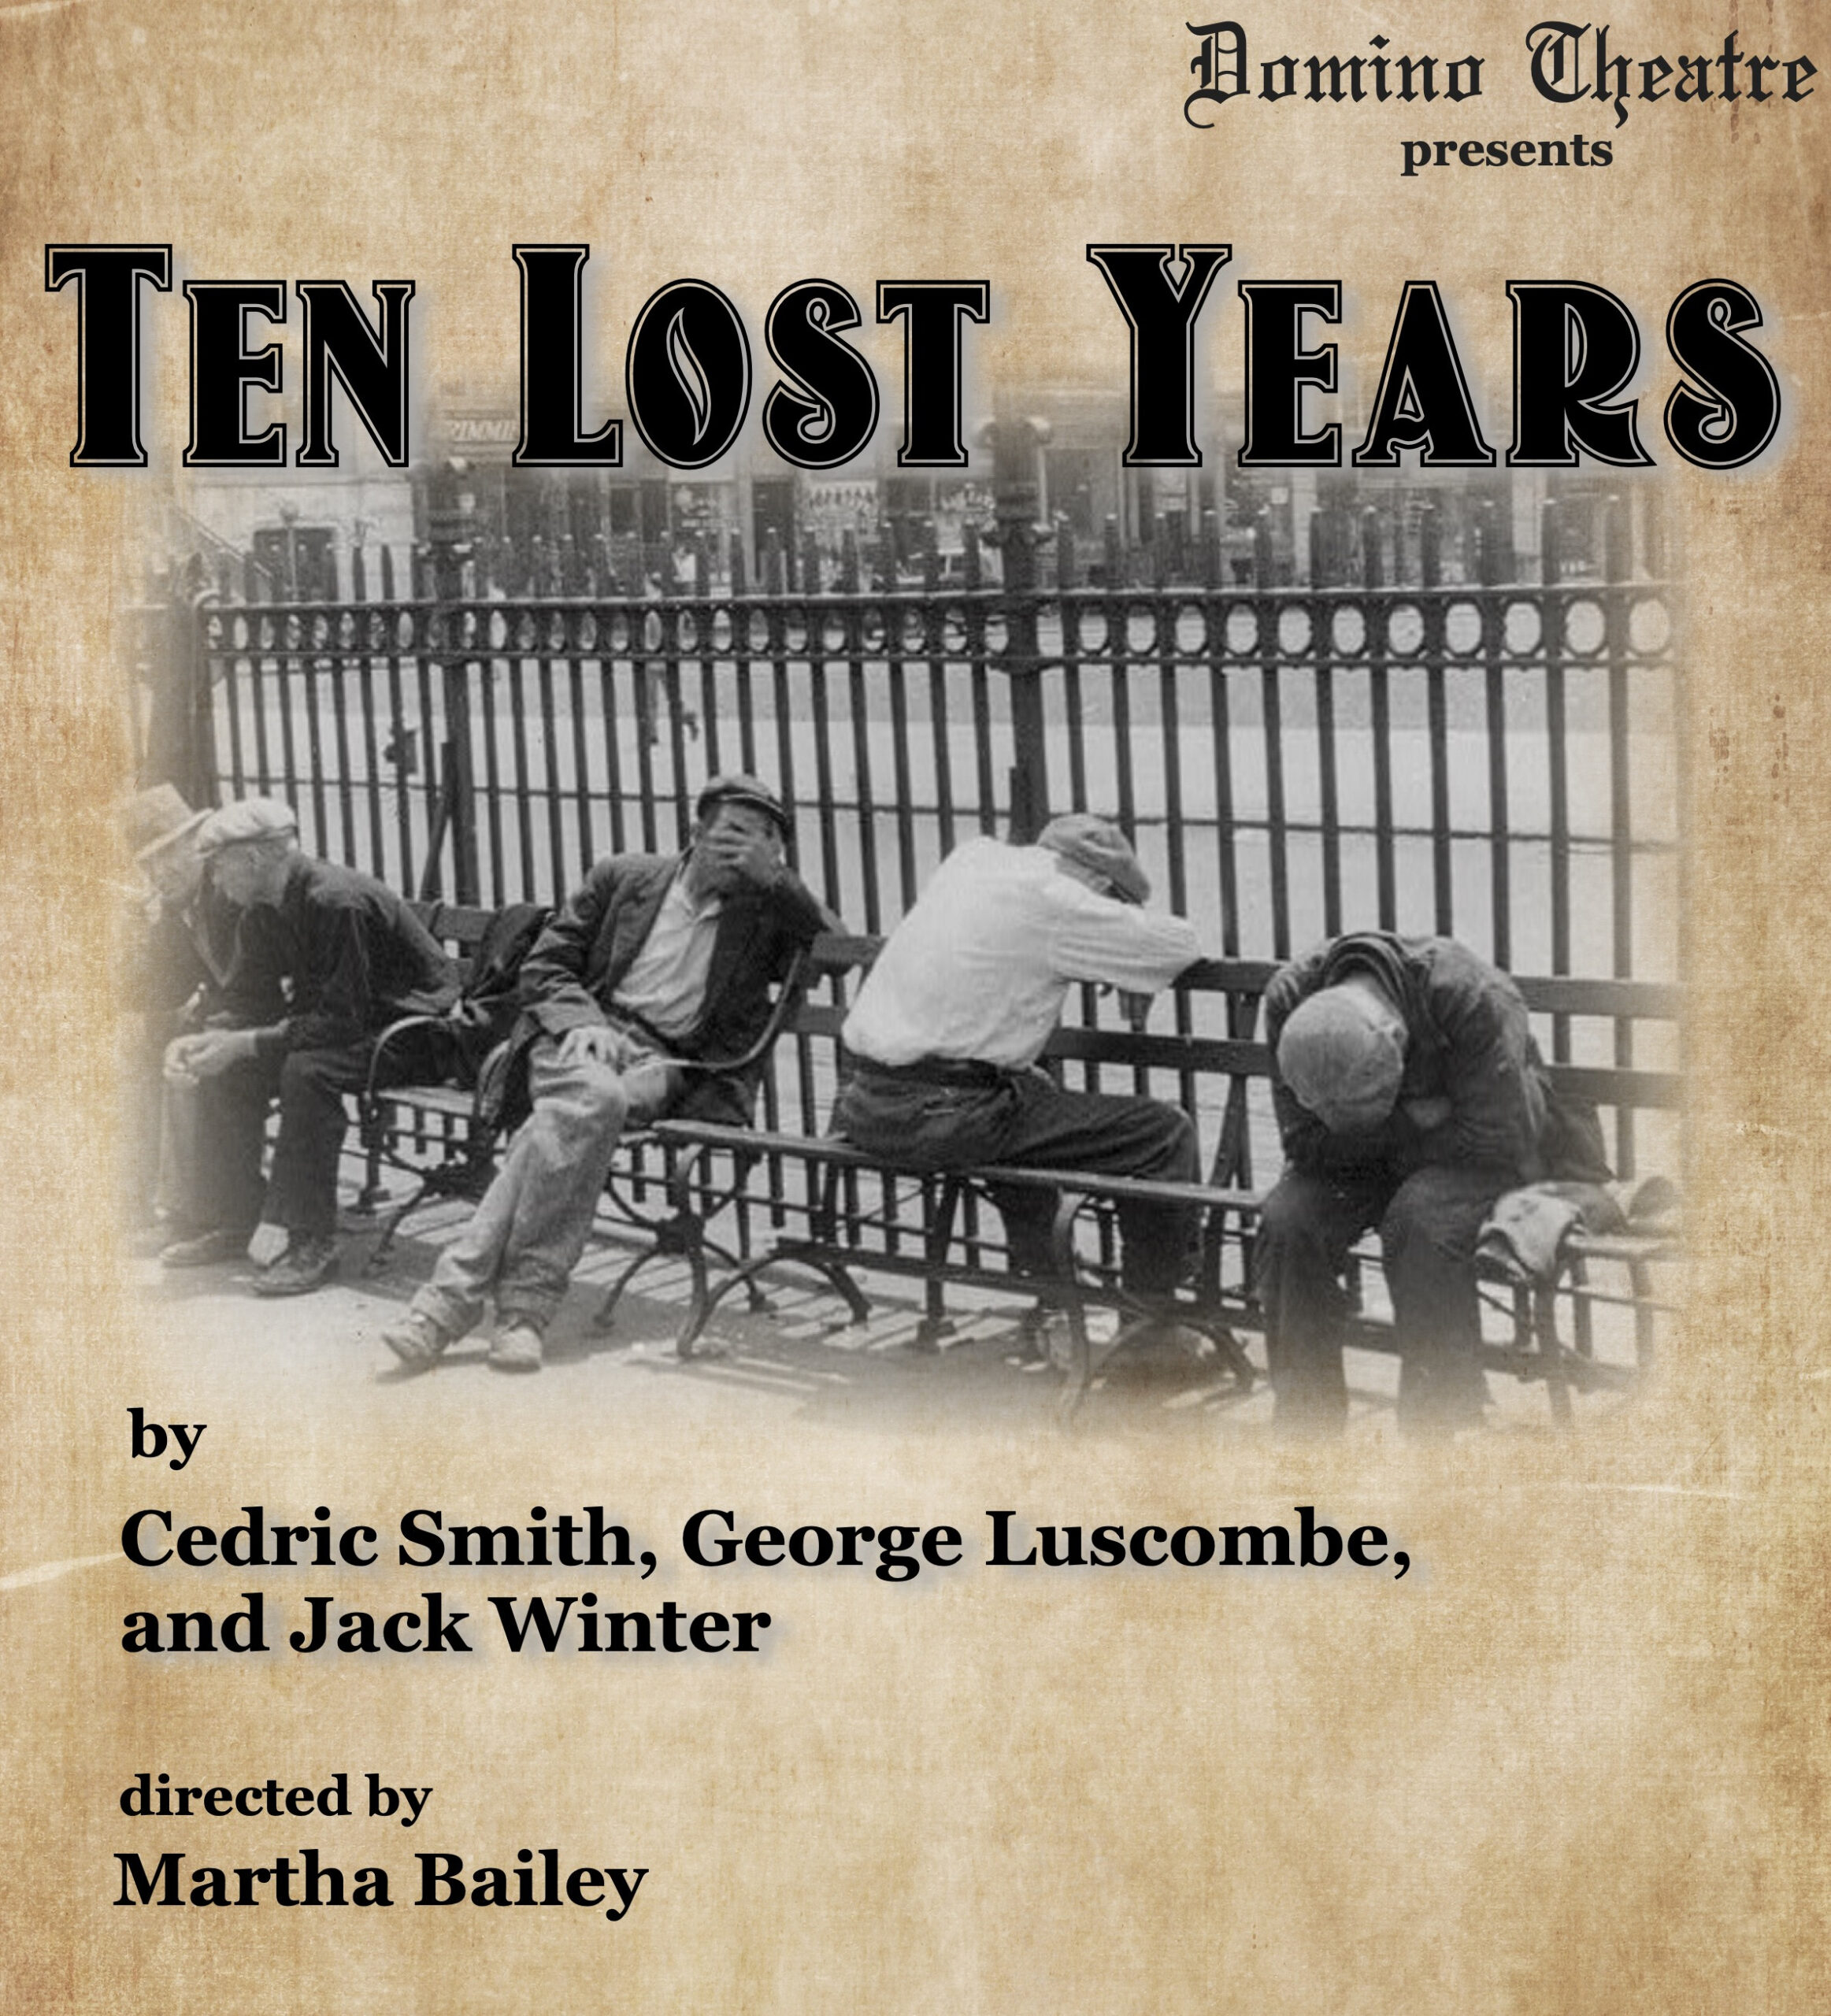 Poster for Domino Theatre's production of 'Ten Lost Years'. The title, playwrights, director, and presenting company are noted.